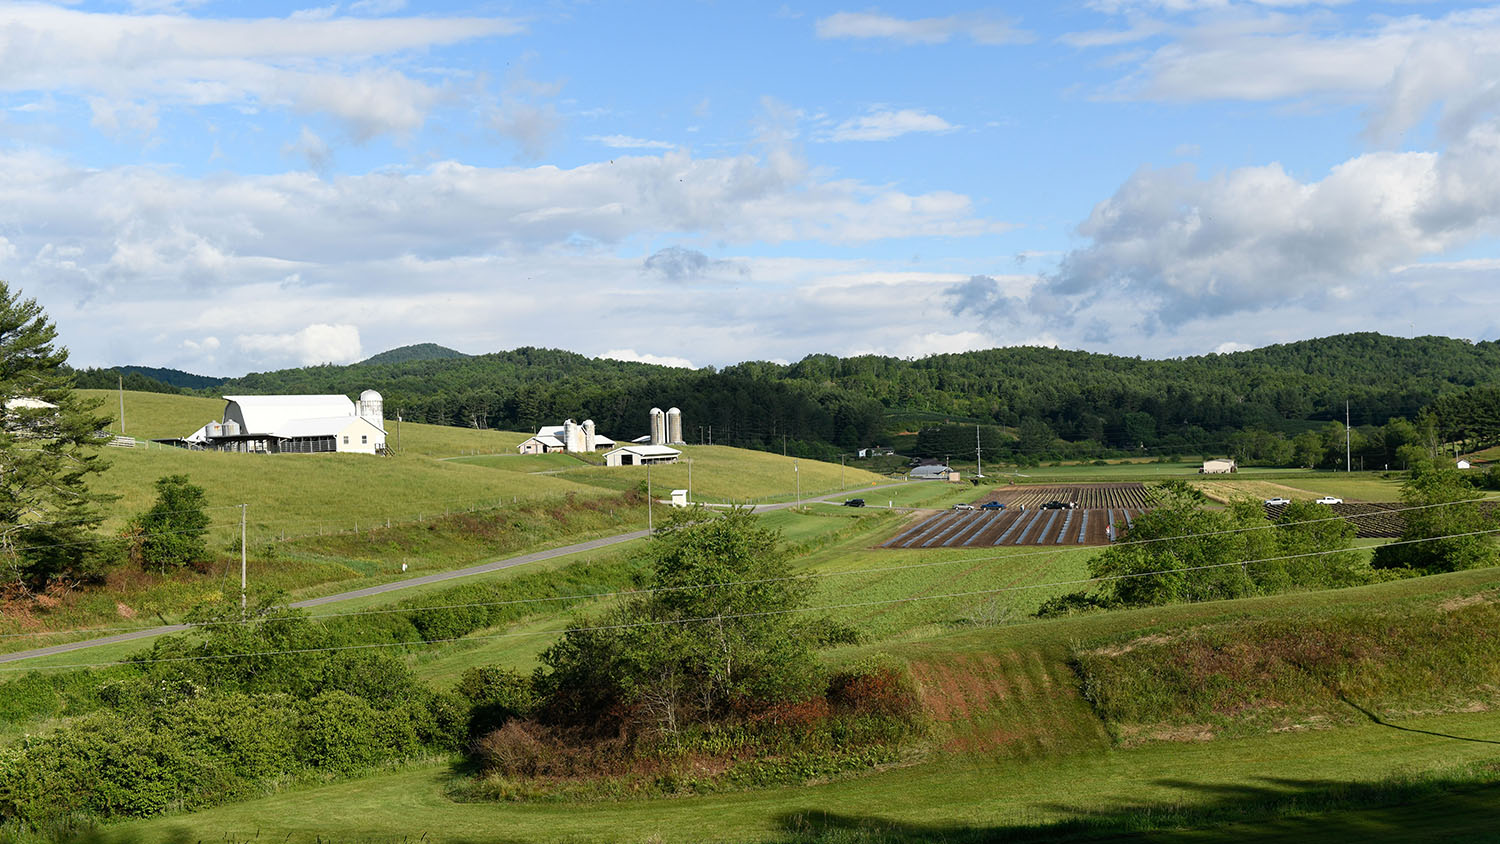 Landscape view of Upper Mountain Research Station with fields and grain silos visable.